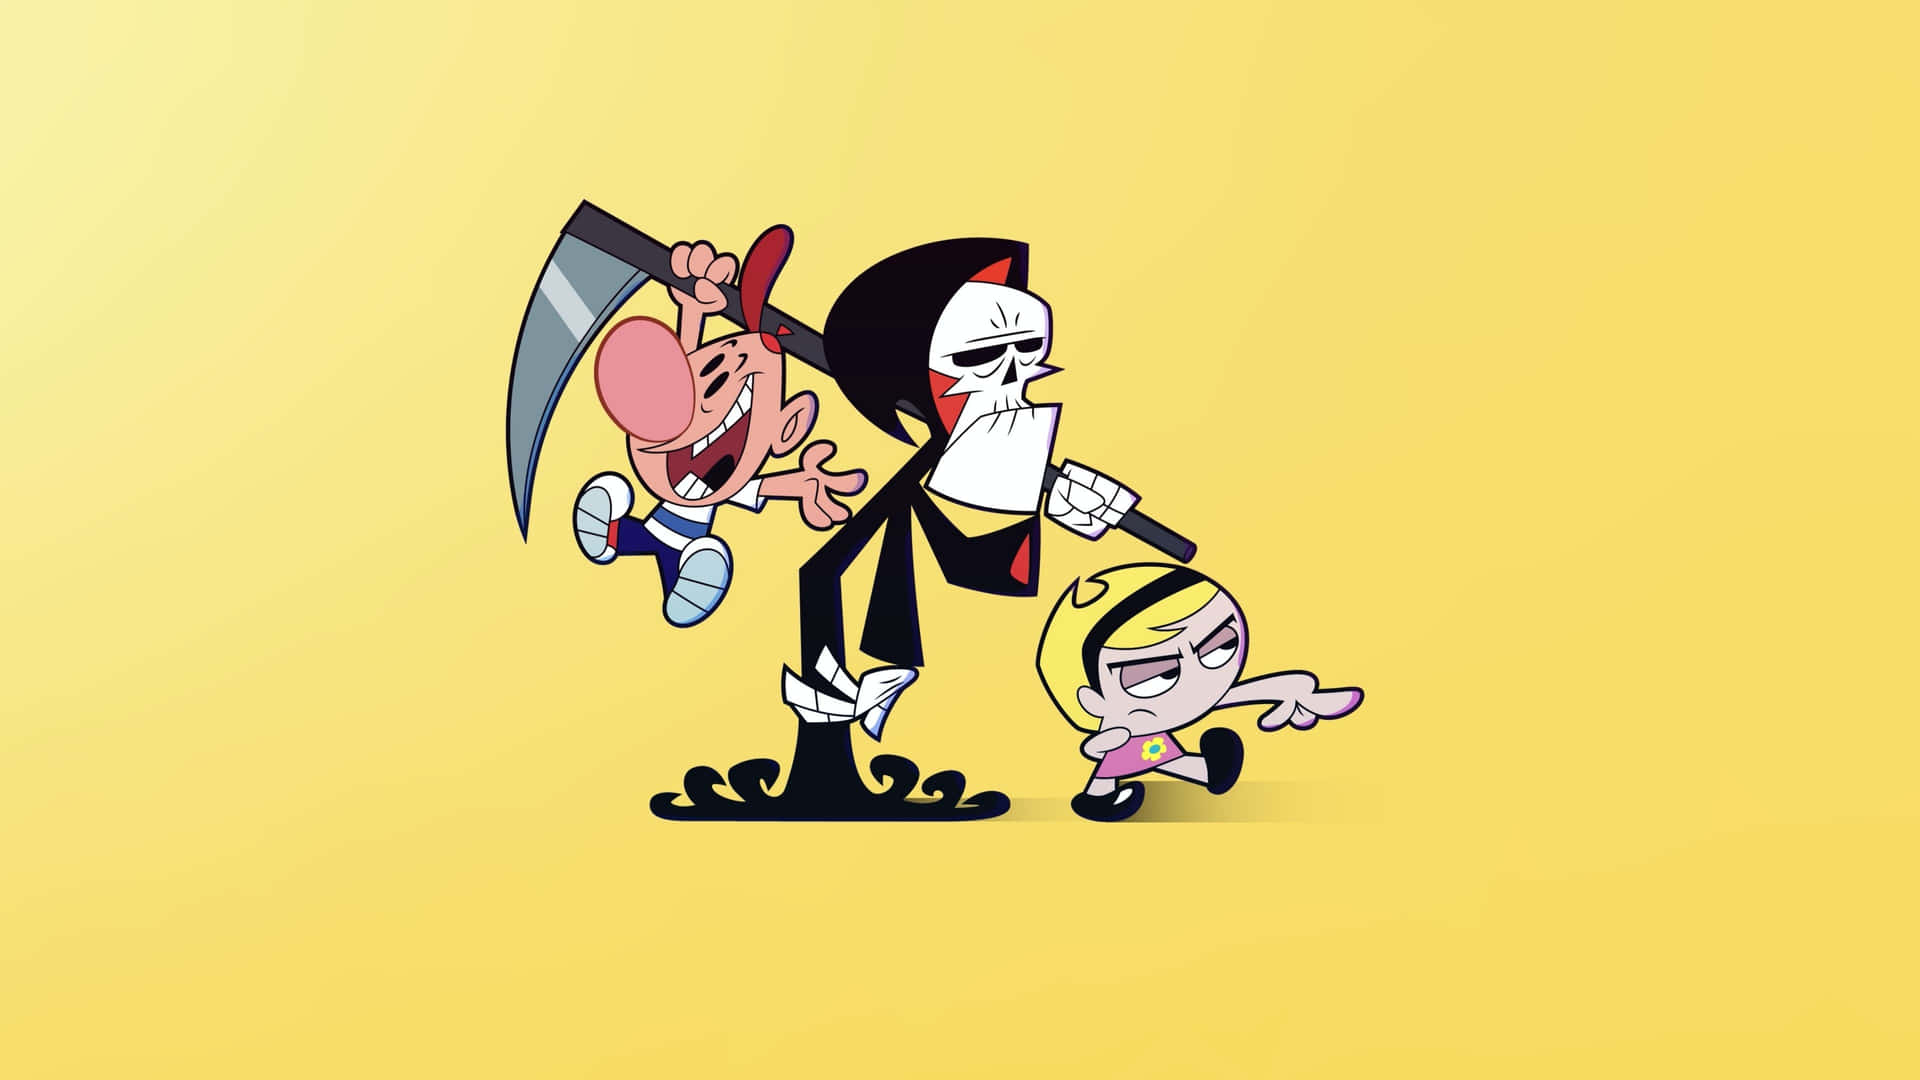 Grim, Billy, and Mandy in a Hauntingly Hilarious Moment Wallpaper